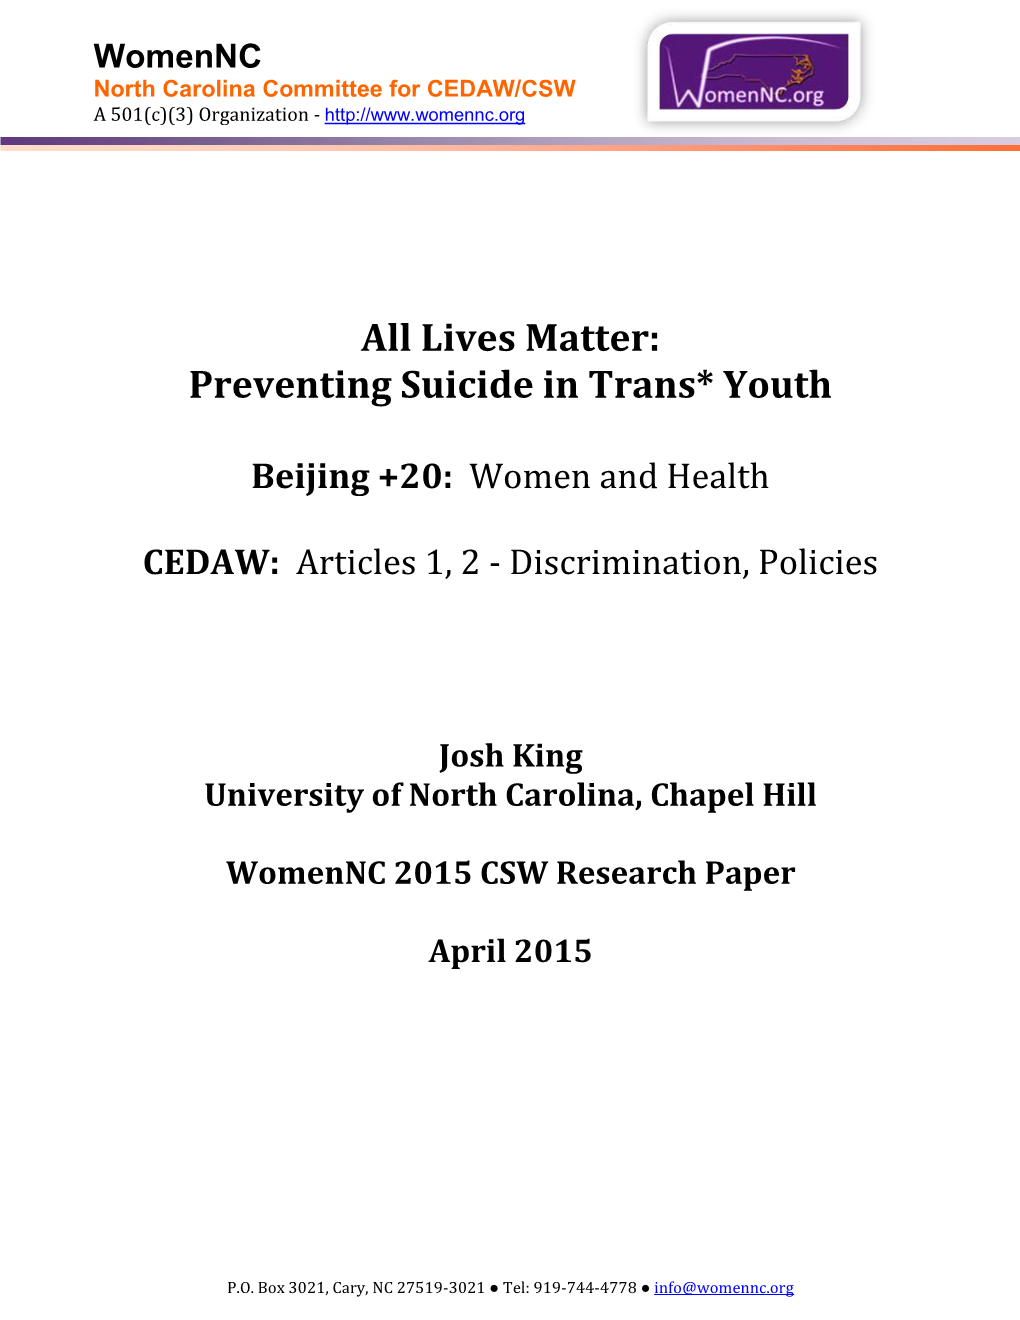 Lives Matter: Preventing Suicide in Trans* Youth